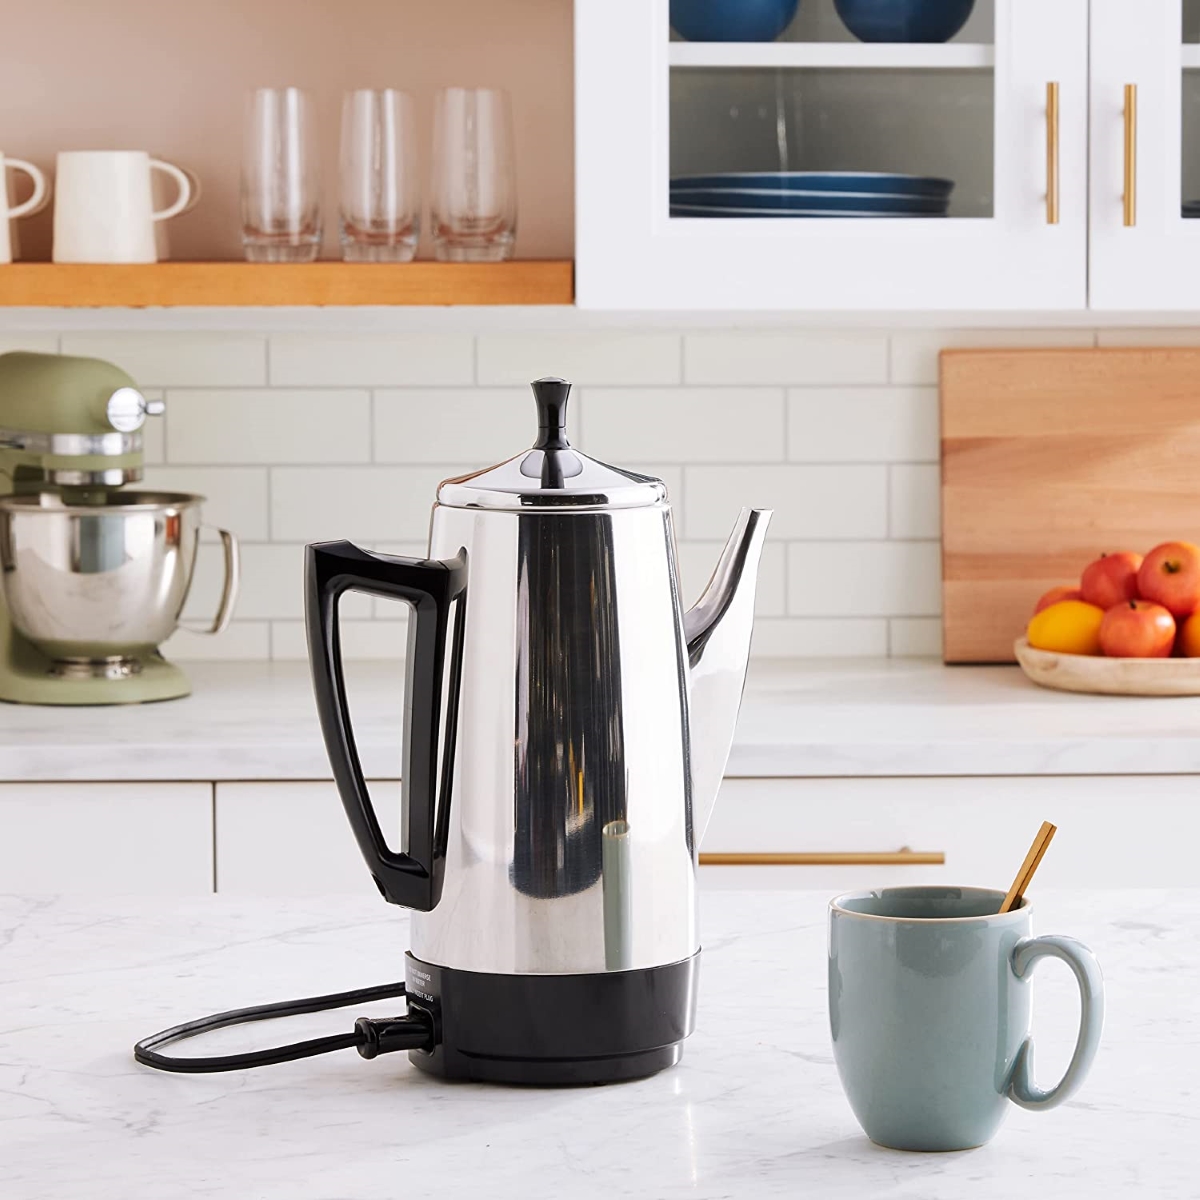 types of coffee makers - silver steel coffee maker in kitchen